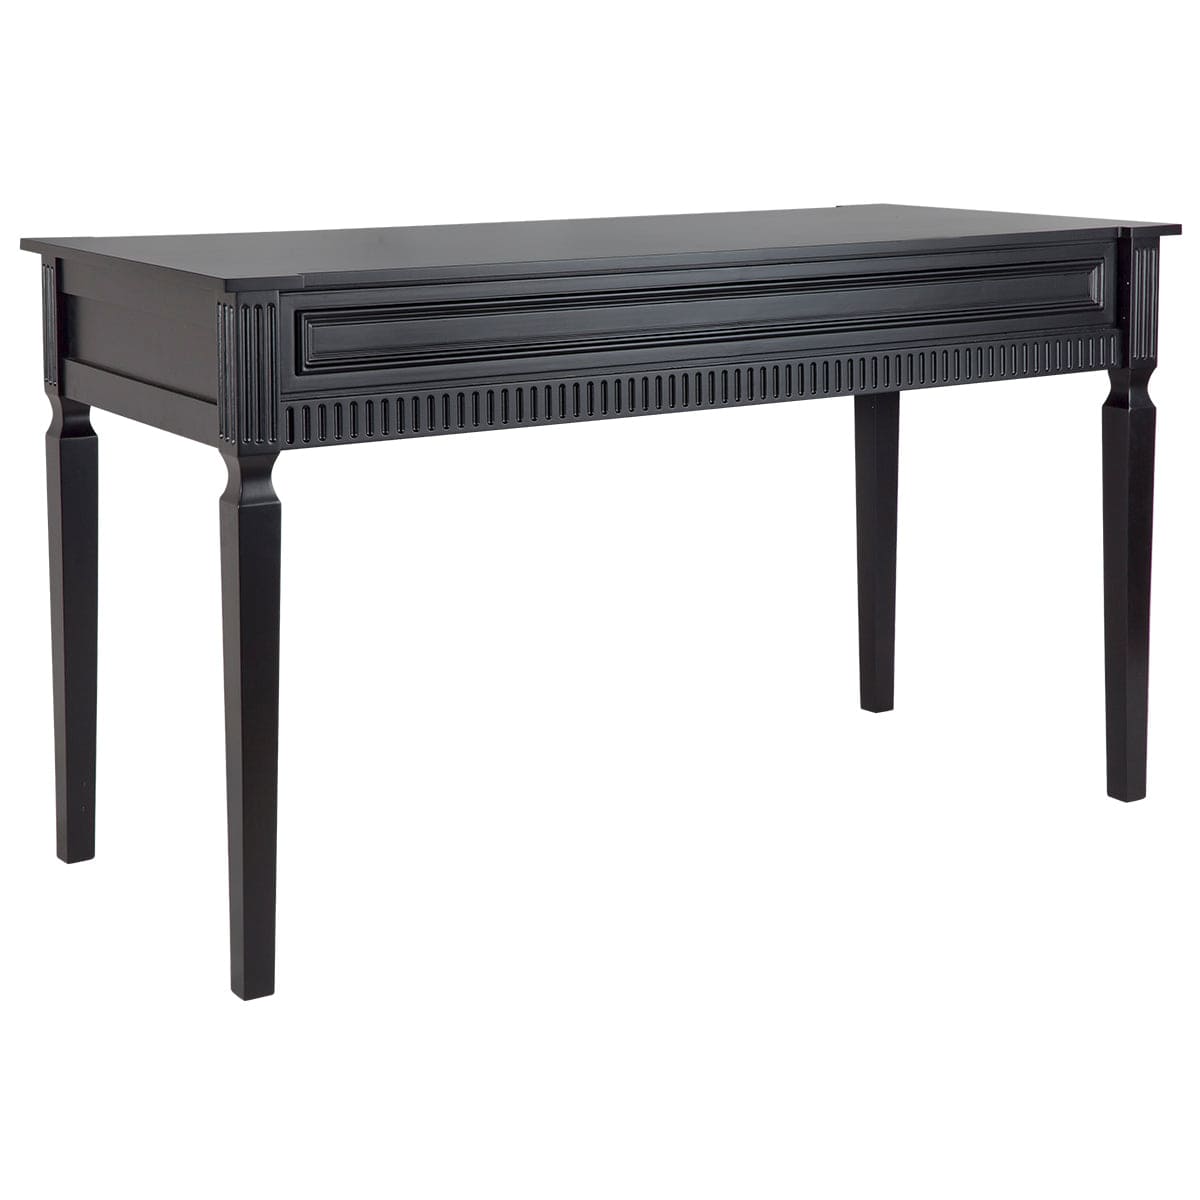 Cafe Lighting & Living Merci Console Table - Black